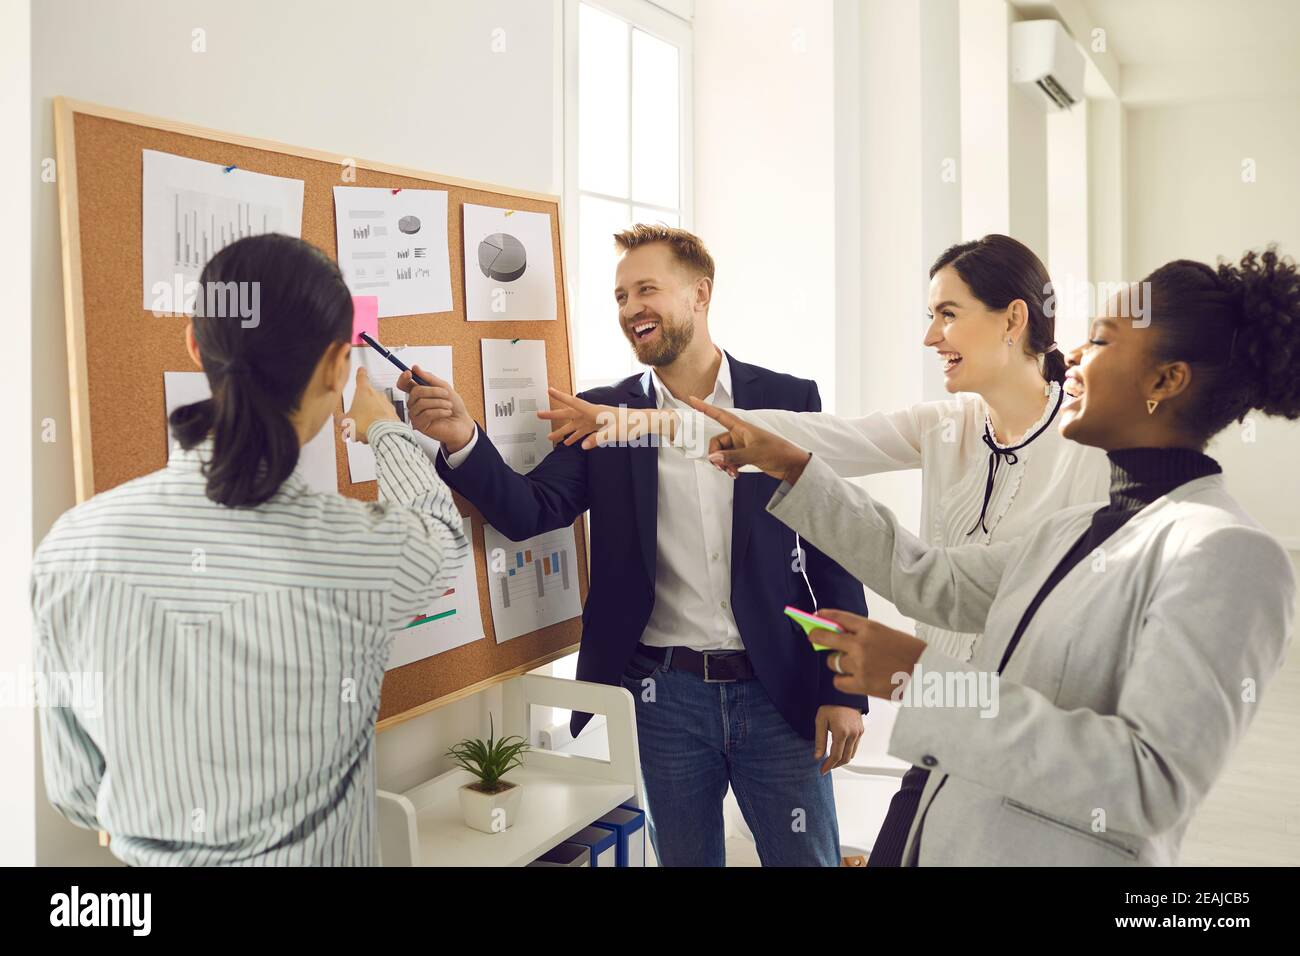 Group of multiethnic business partners laughing at reminder at board together Stock Photo